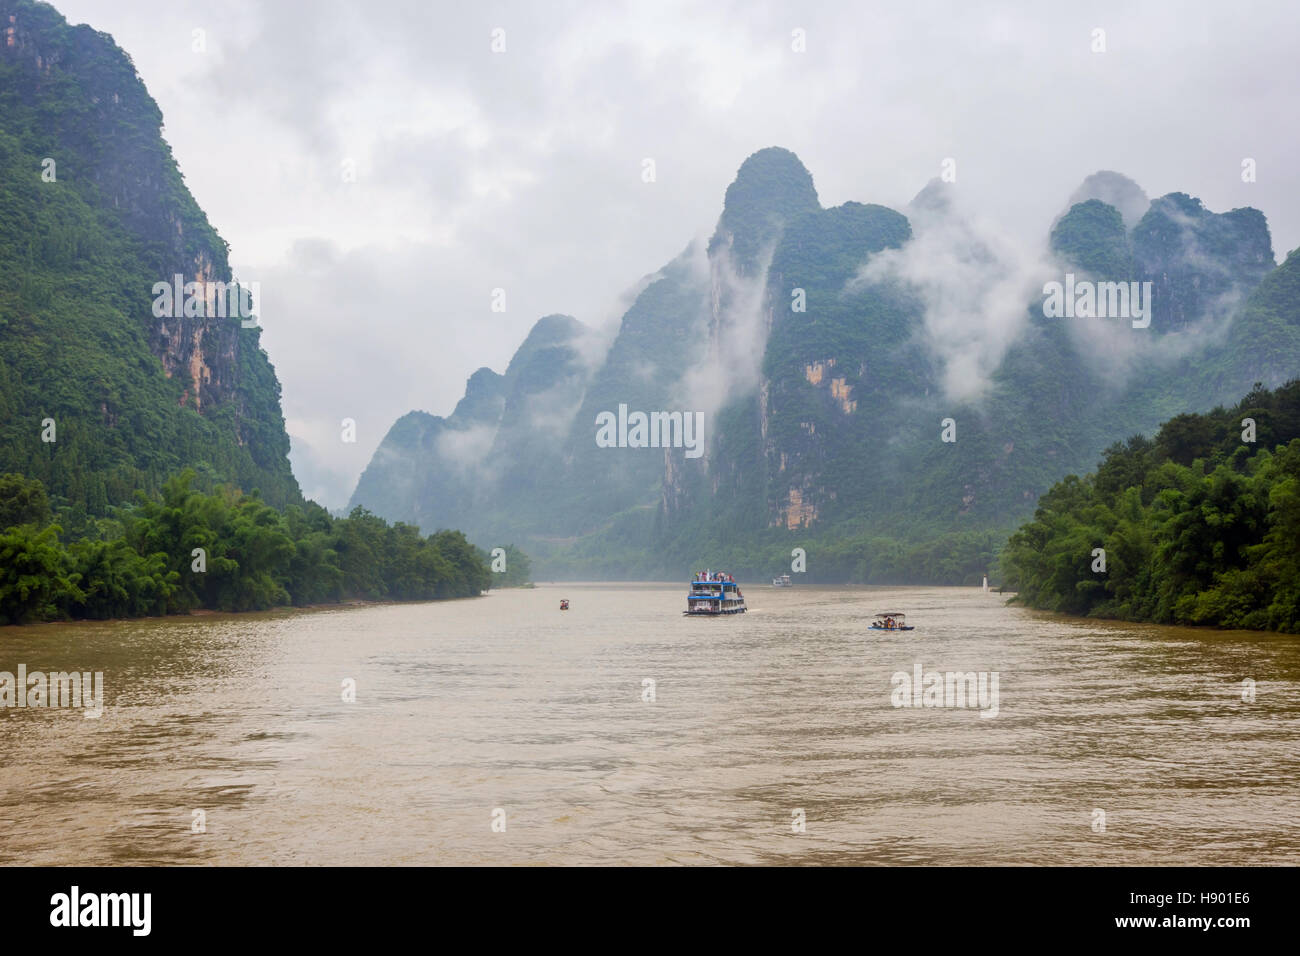 Li river with misty clouds and fog surrounded by famous karst mountains, Guangxi Zhuang, China Stock Photo